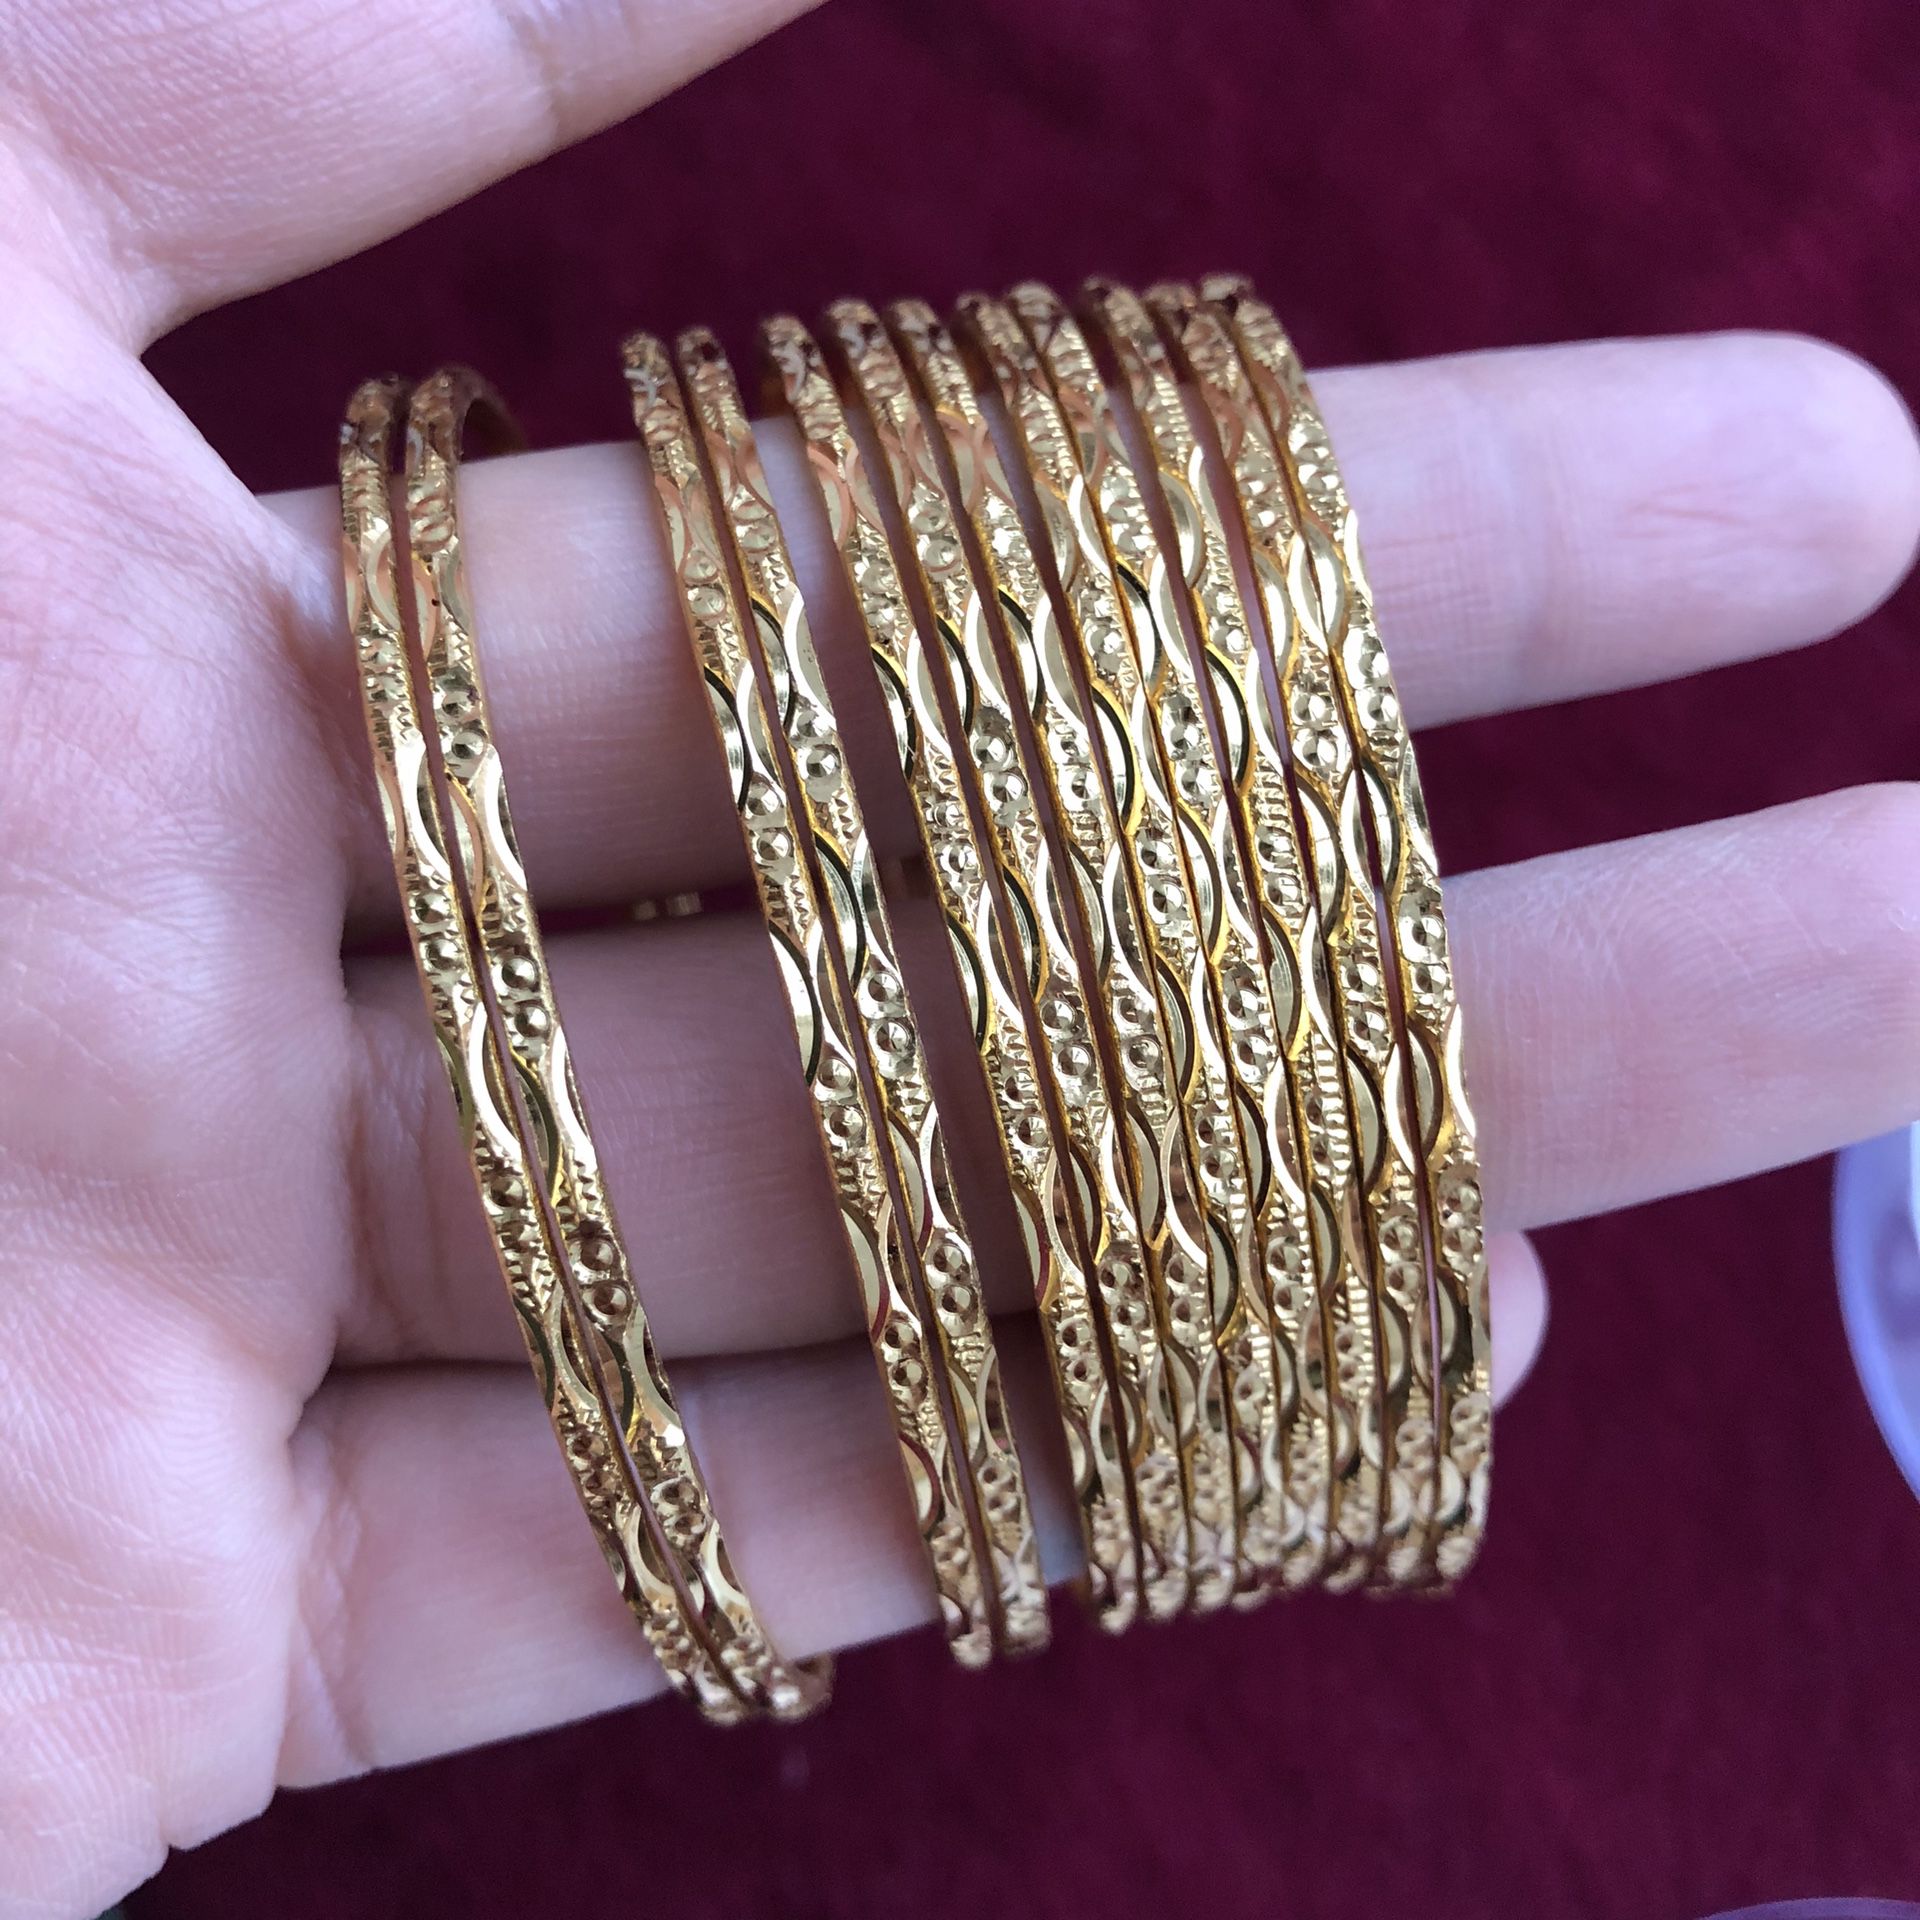 22k Gold Plated Indian Bollywood Bangles Jewellery Size 2-6 2-8 Available 